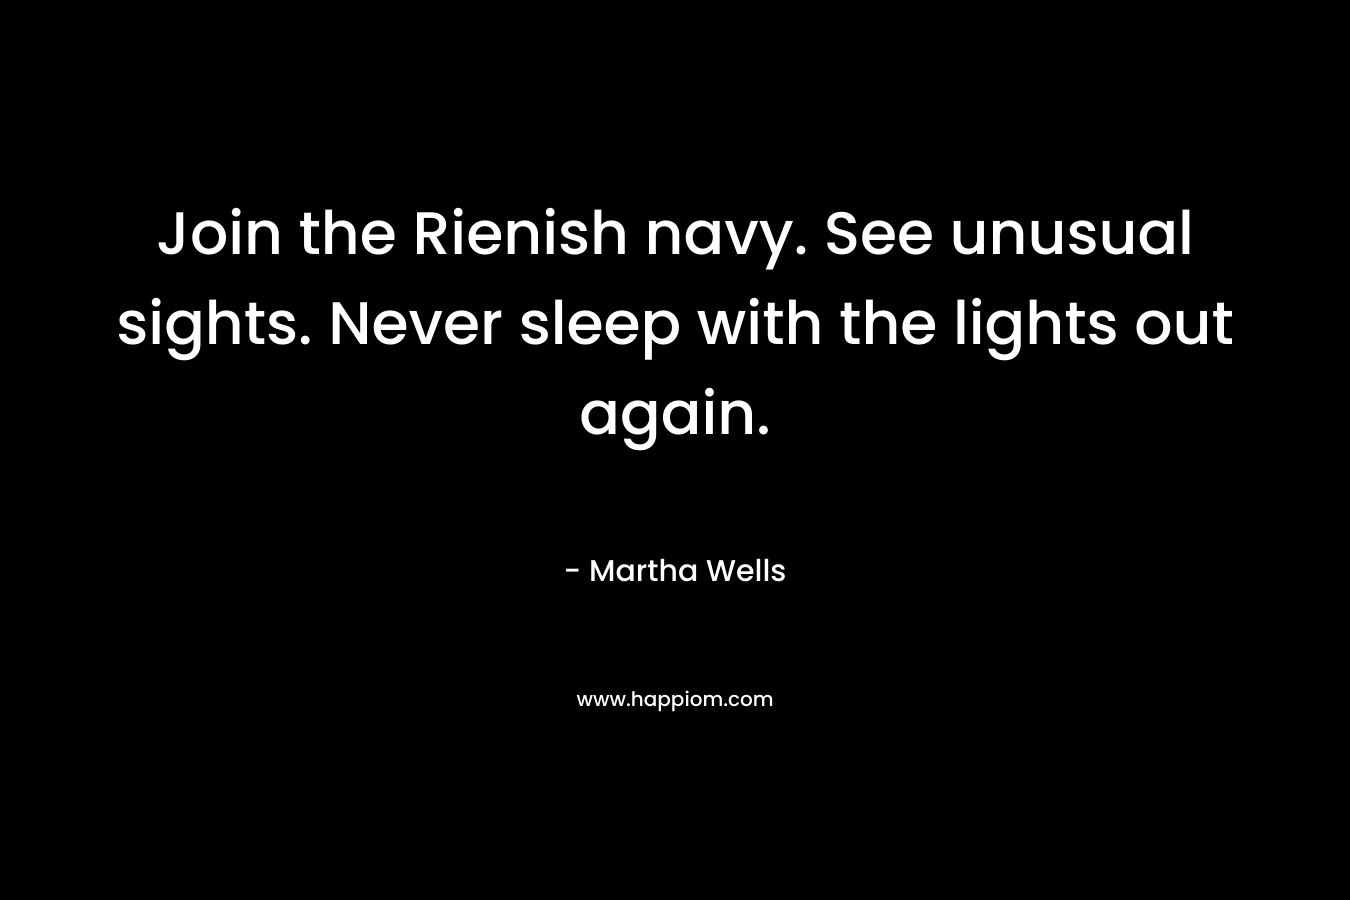 Join the Rienish navy. See unusual sights. Never sleep with the lights out again.